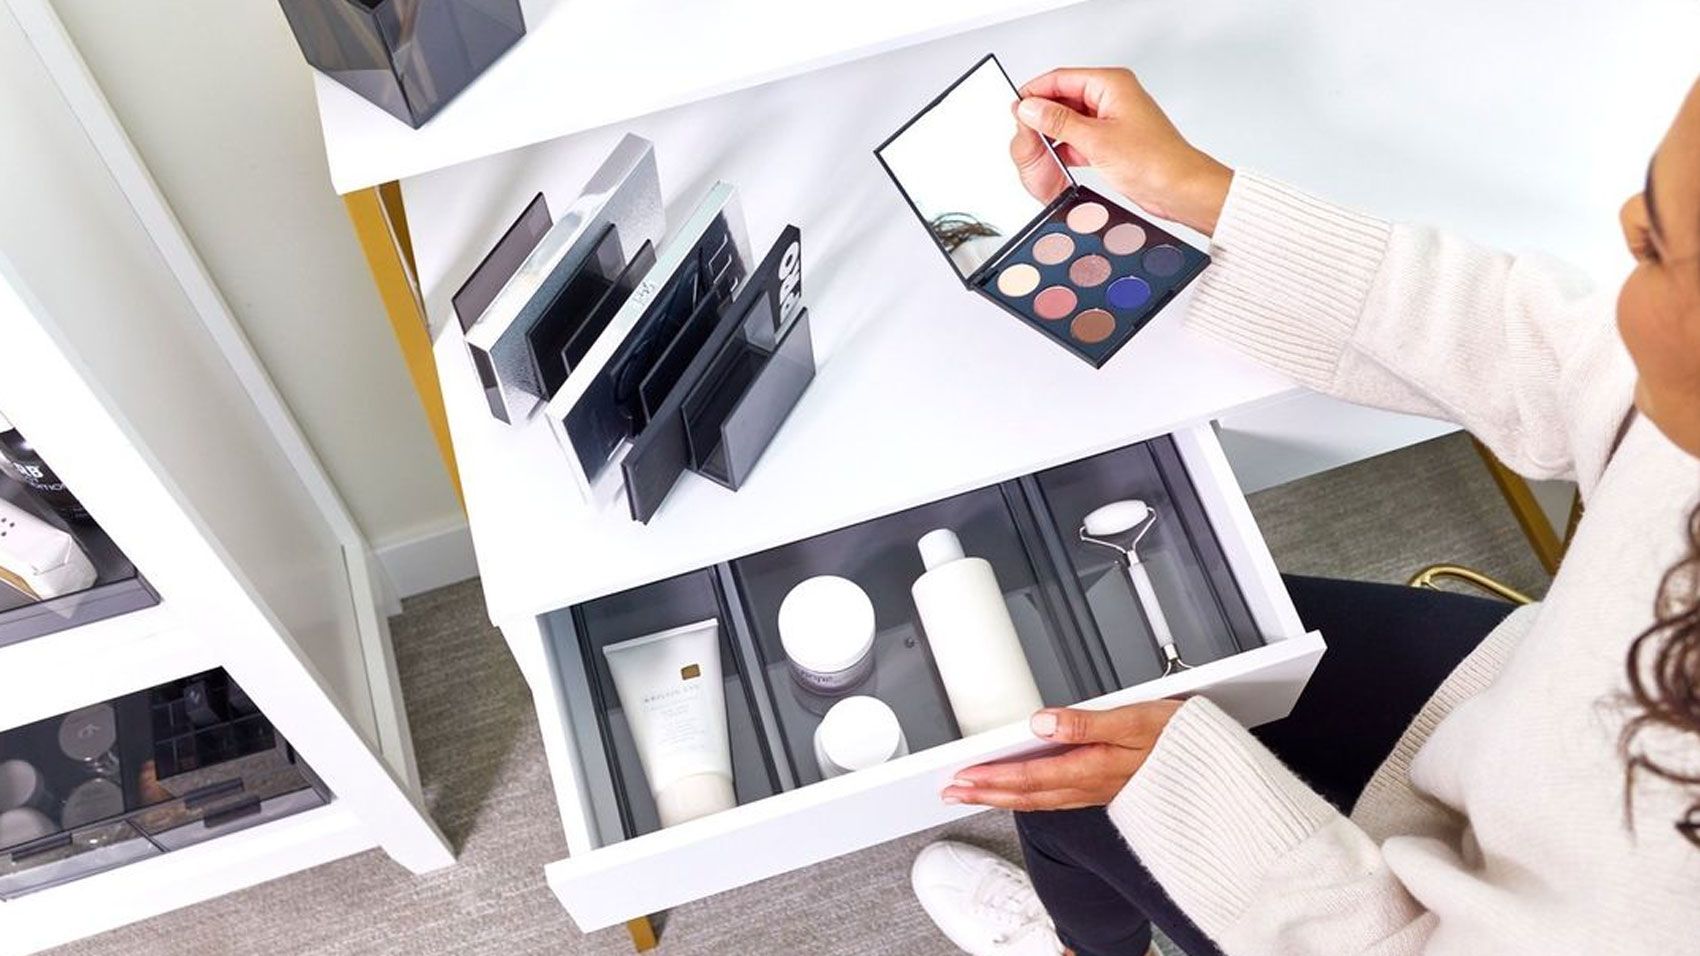 Luxe Makeup Organizer and Storage Set of 2